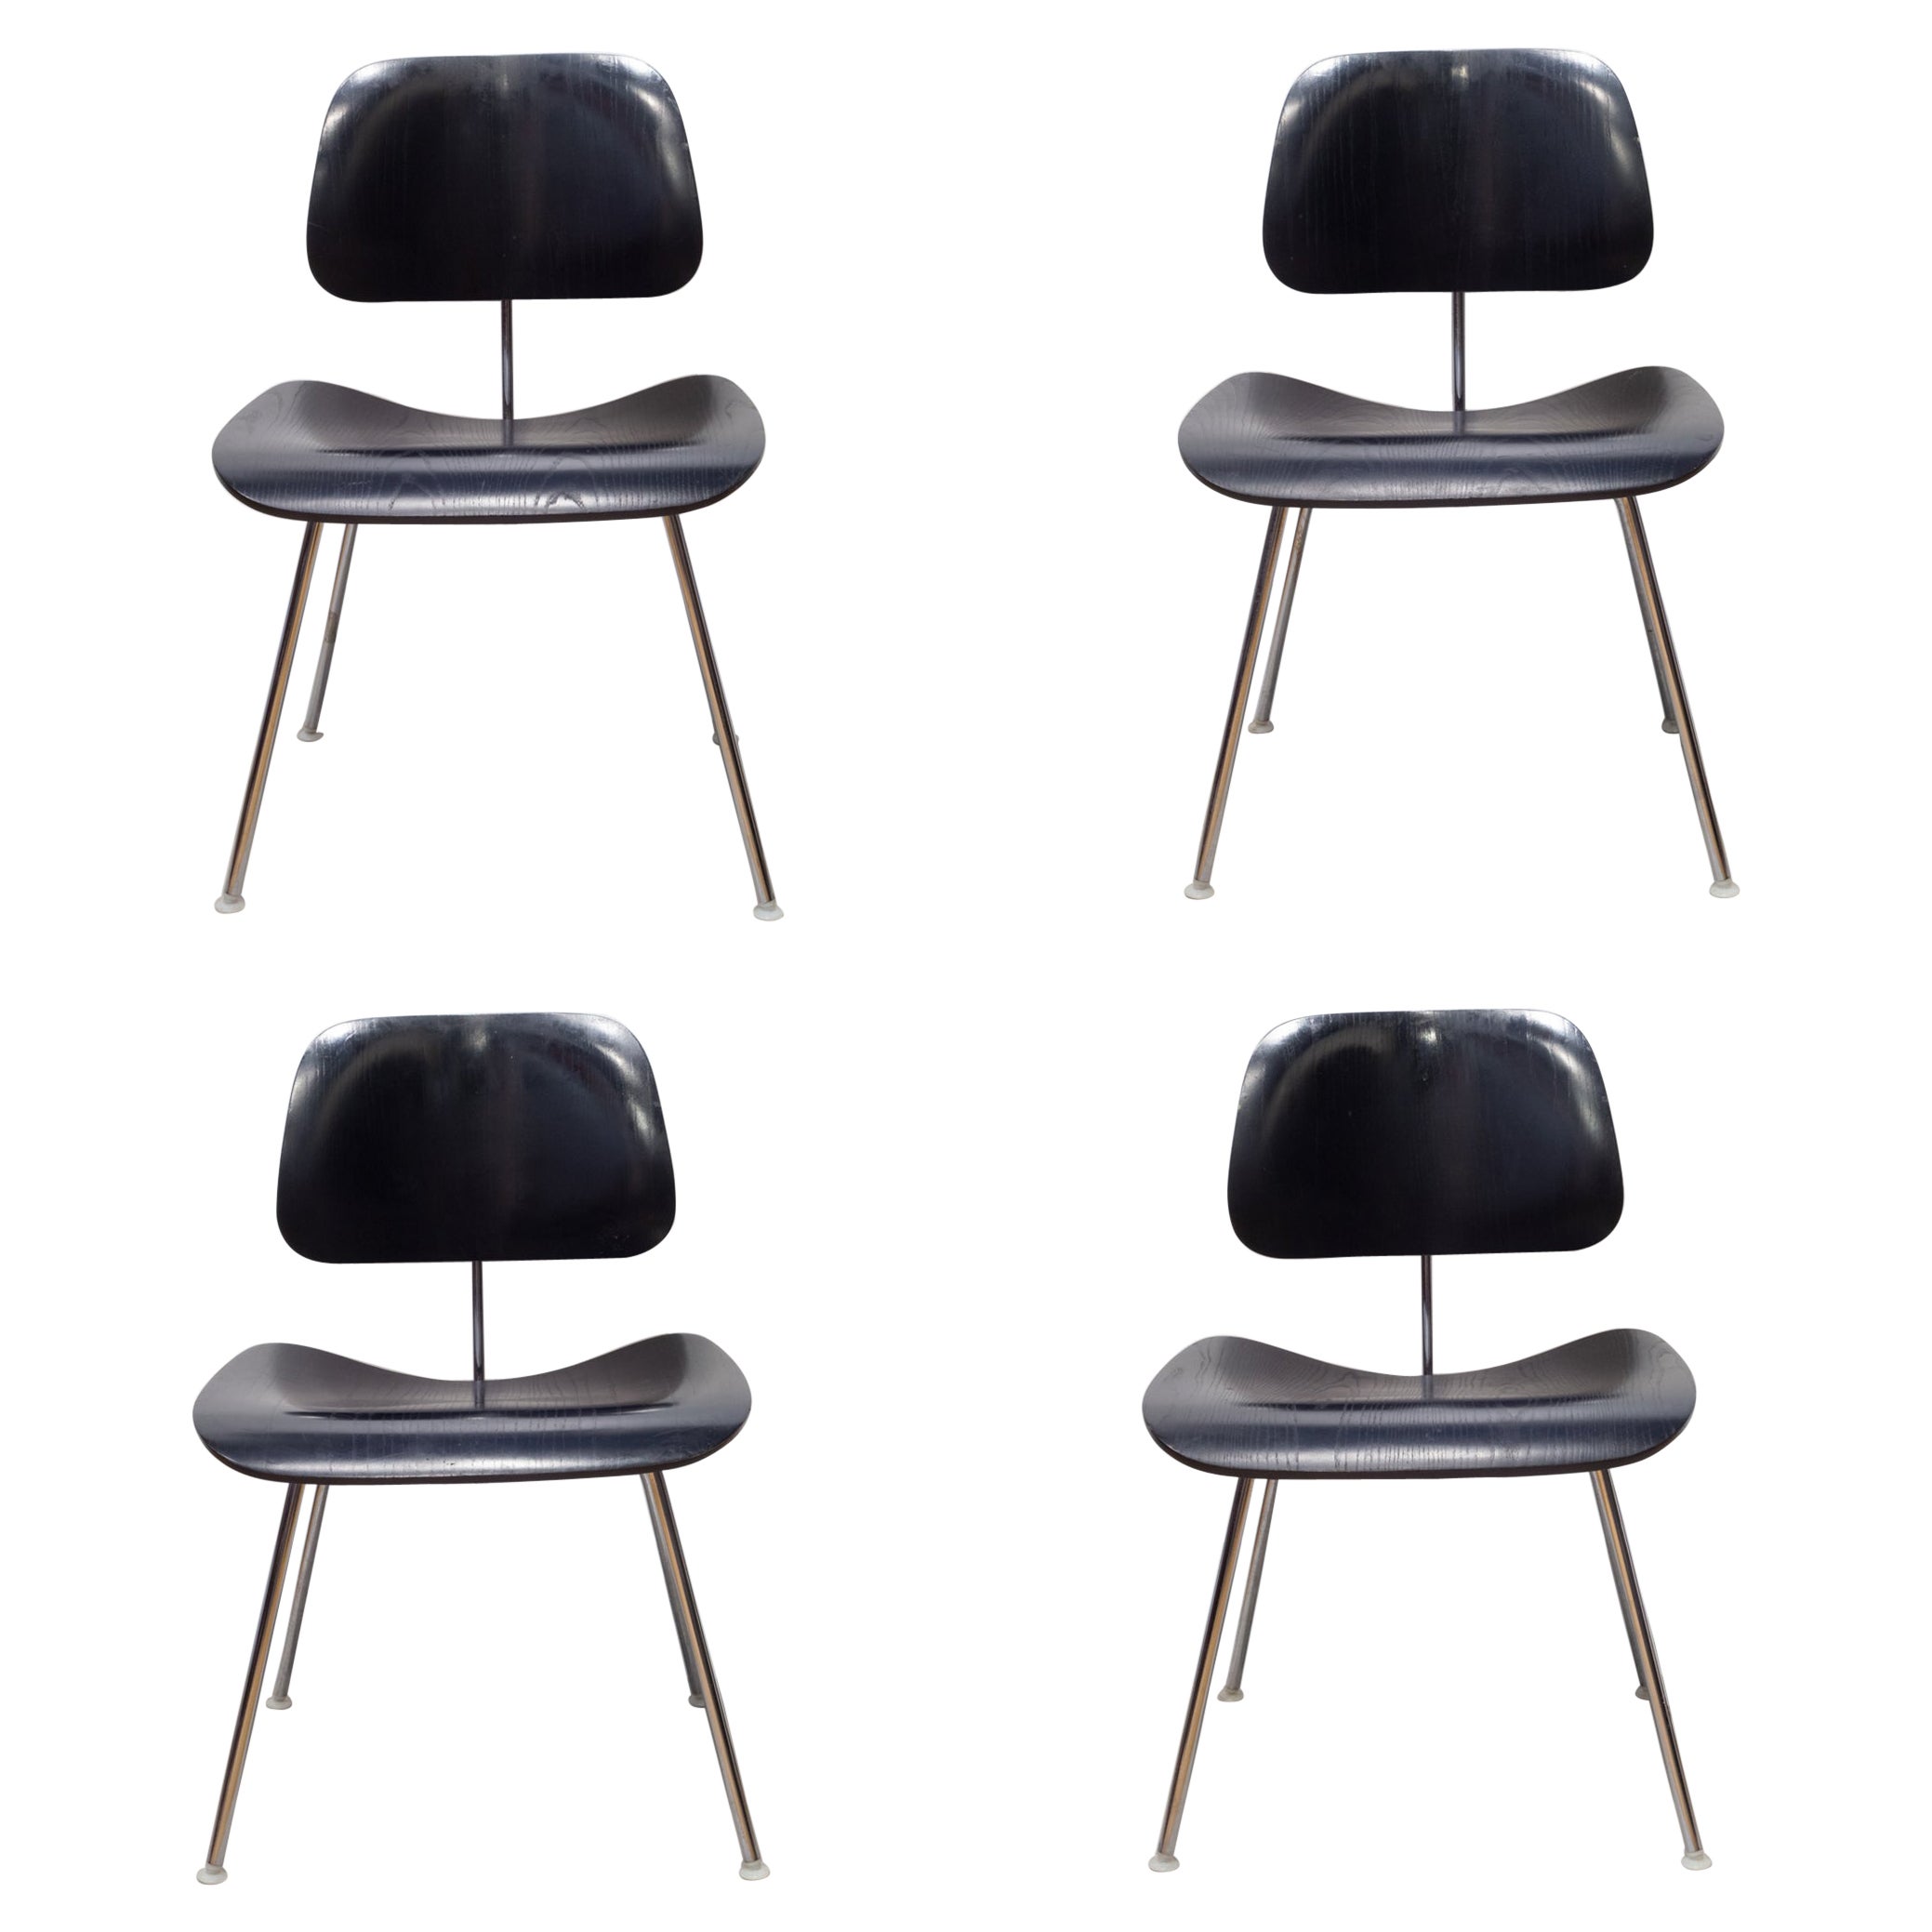 Eames for Herman Miller DCM Chairs in Black-Price is Per Chair